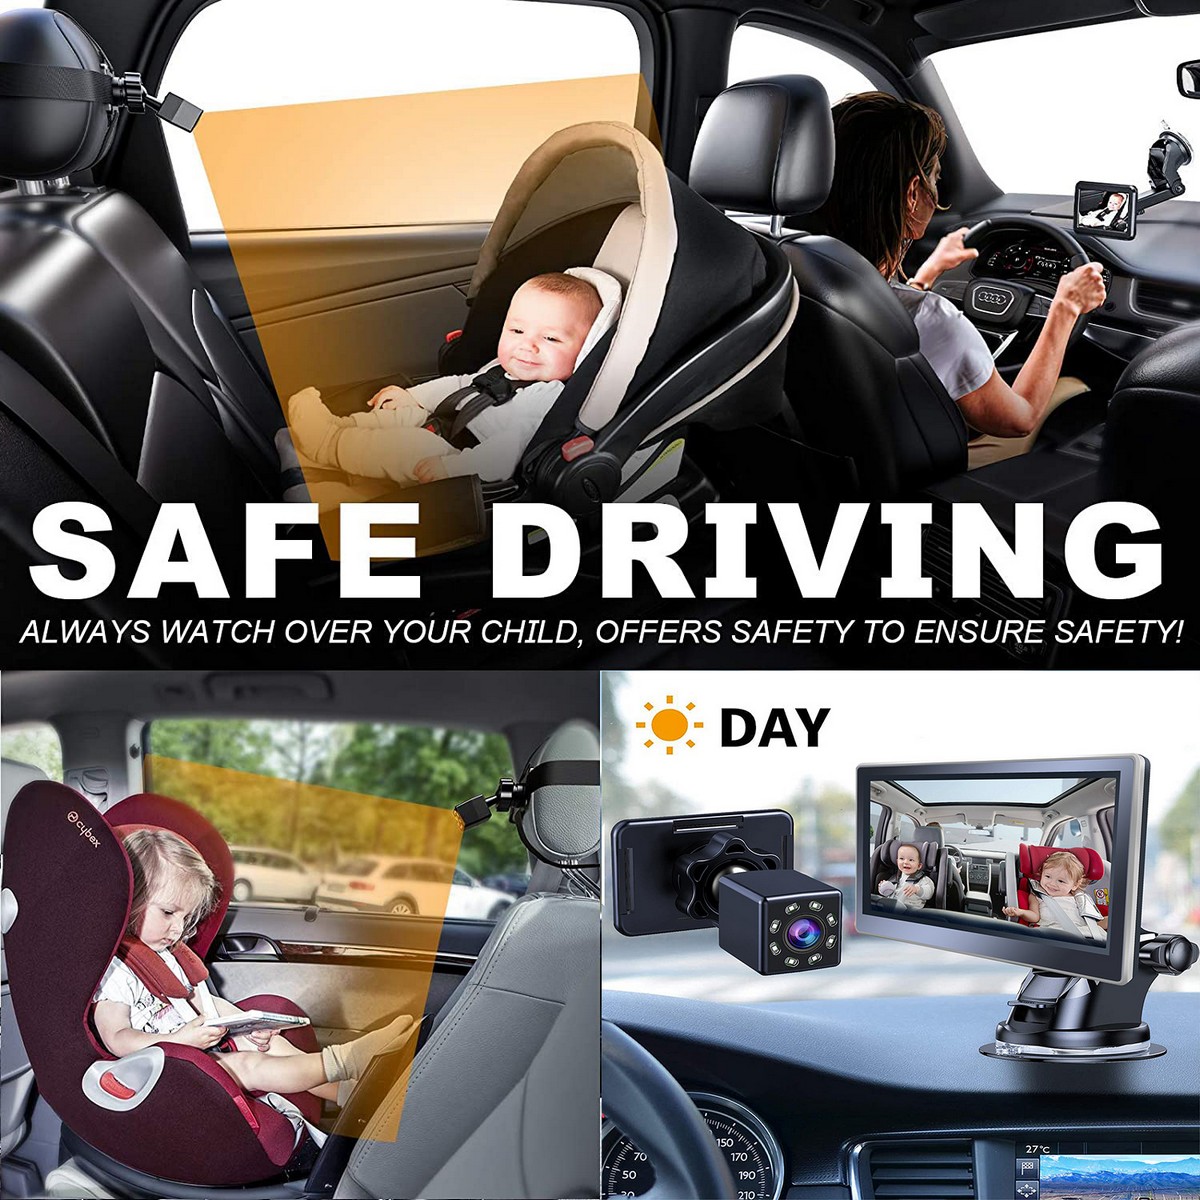 Camera system for monitoring children in the car